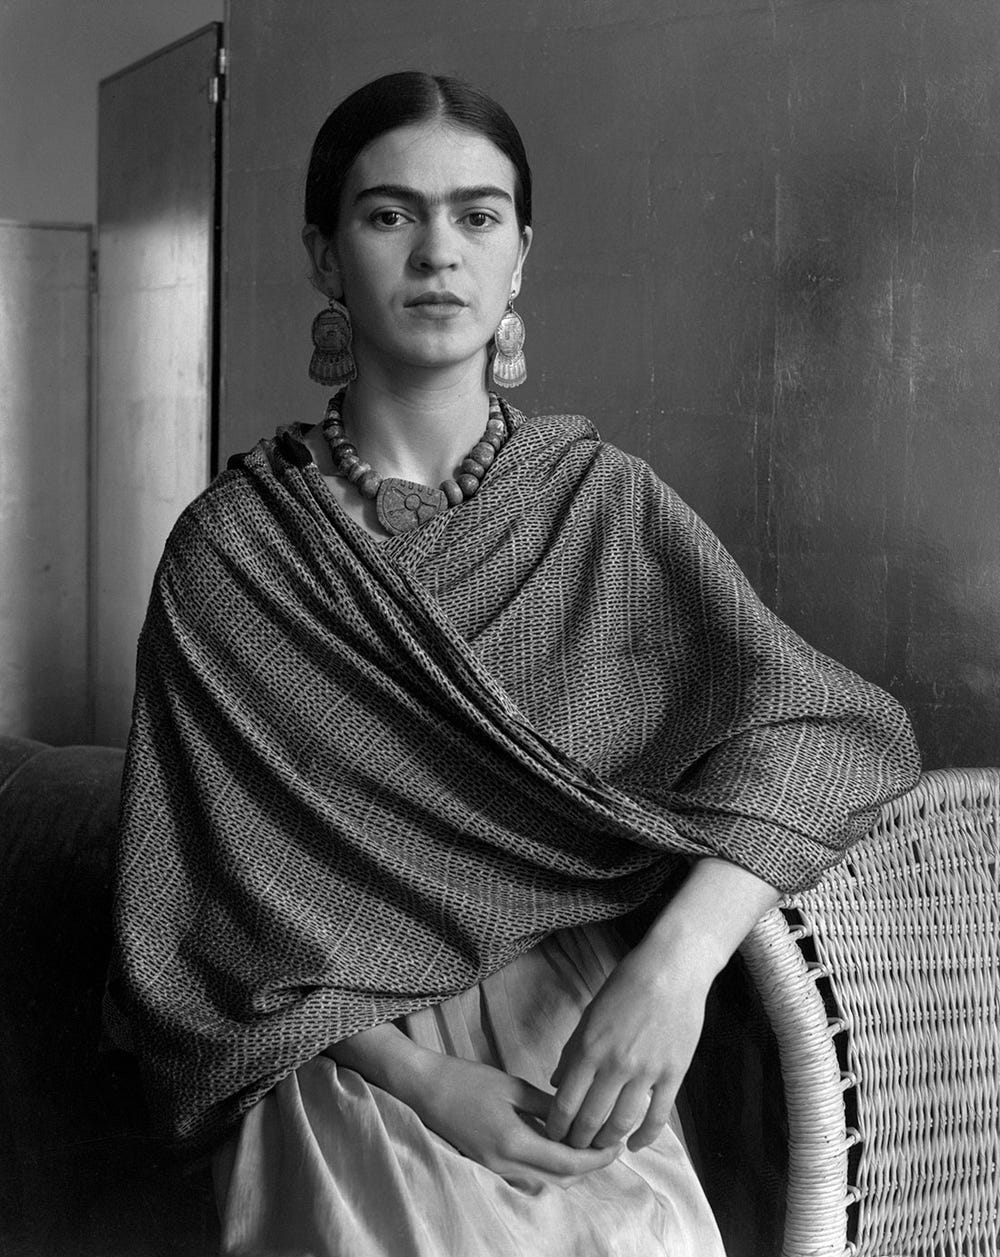 black and white portrait of Frida Kahlo with large jewelry and a shawl